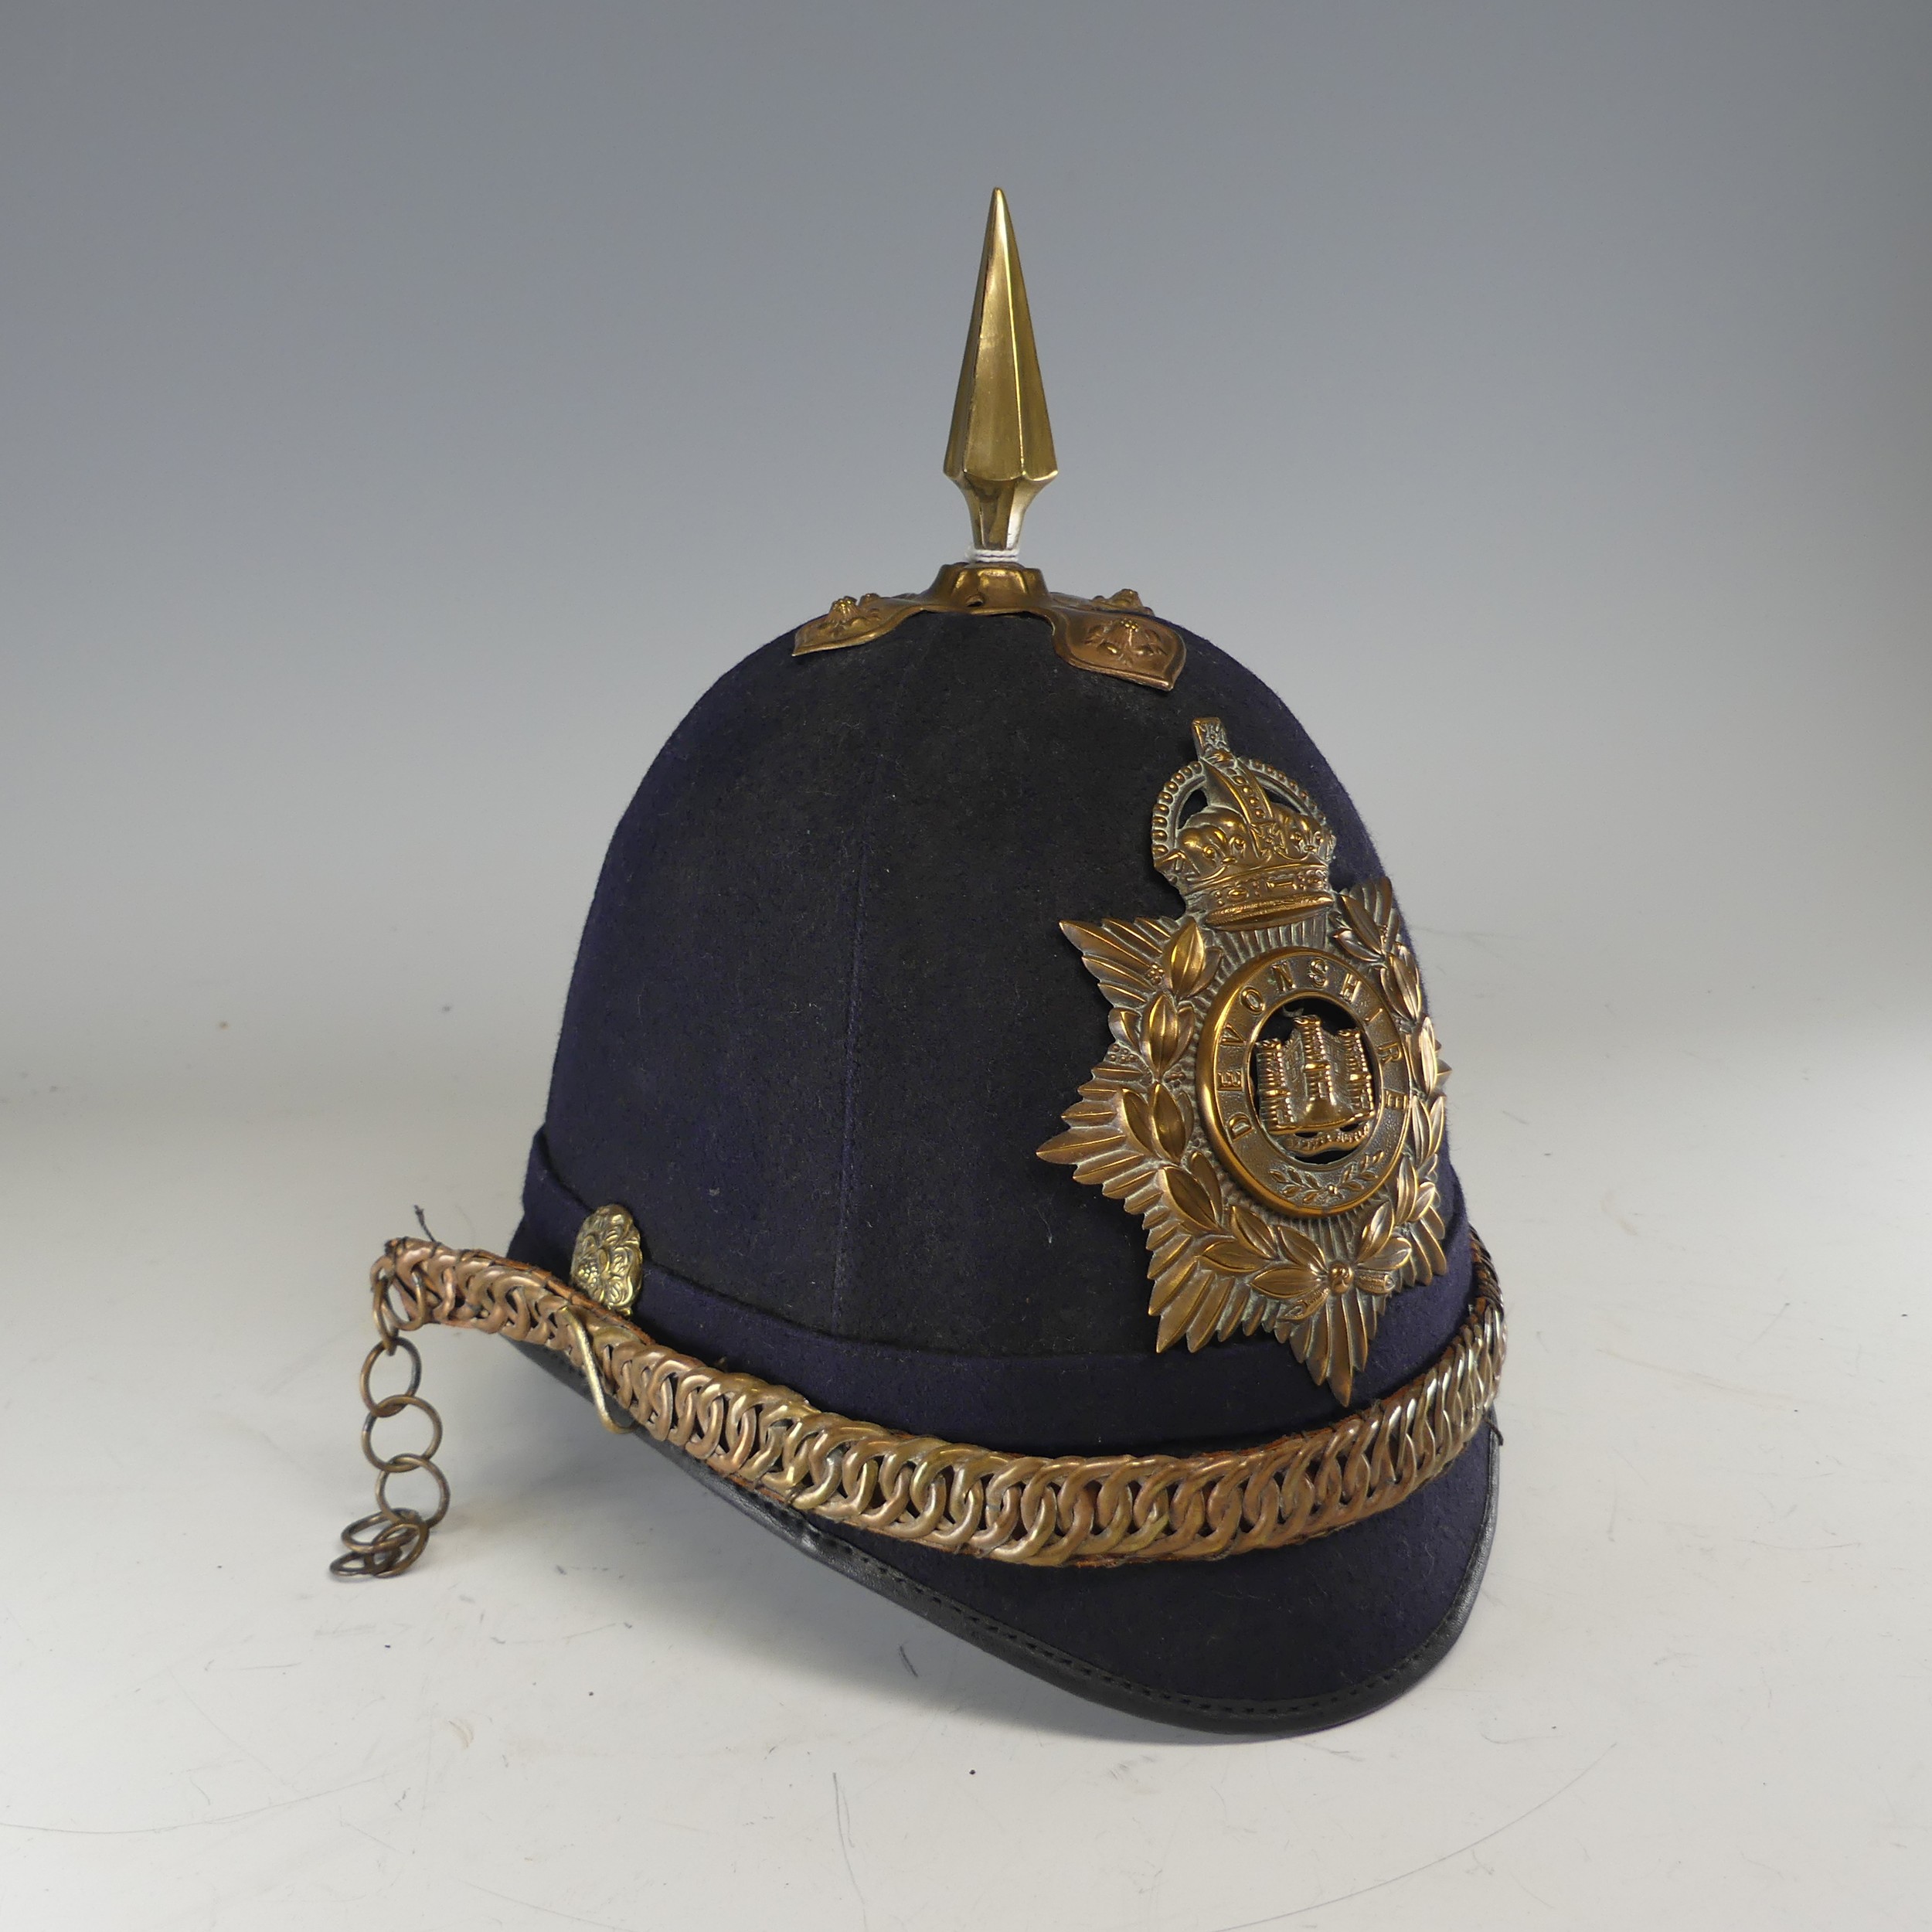 A Devonshire Regiment Officer’s Blue Cloth Helmet, 1902-14 style, together with a Victorian style